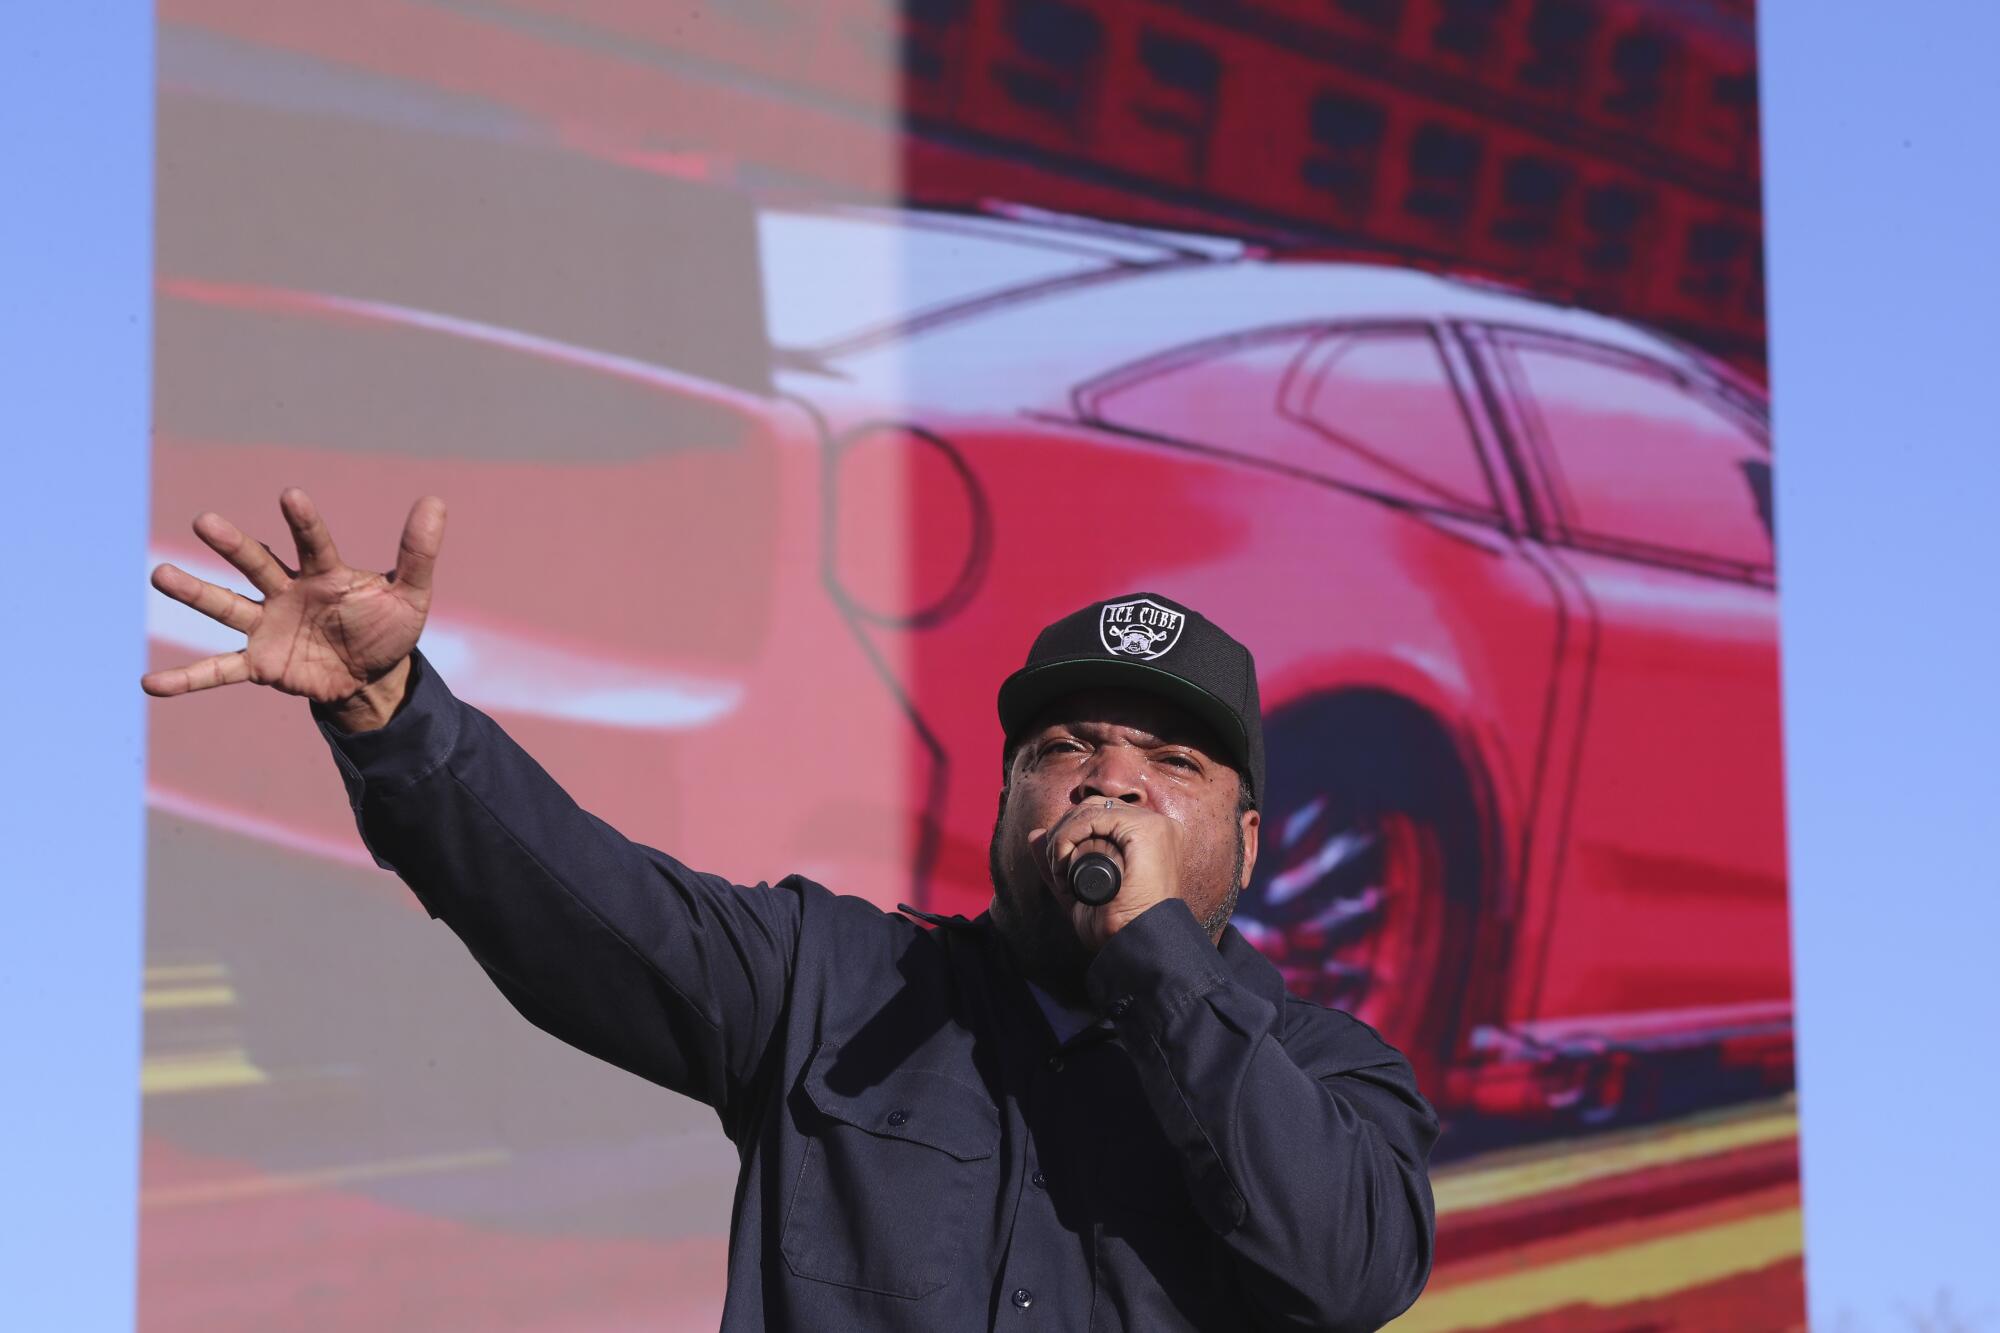 Rapper Ice Cube performs at the Busch Light Clash At The Coliseum